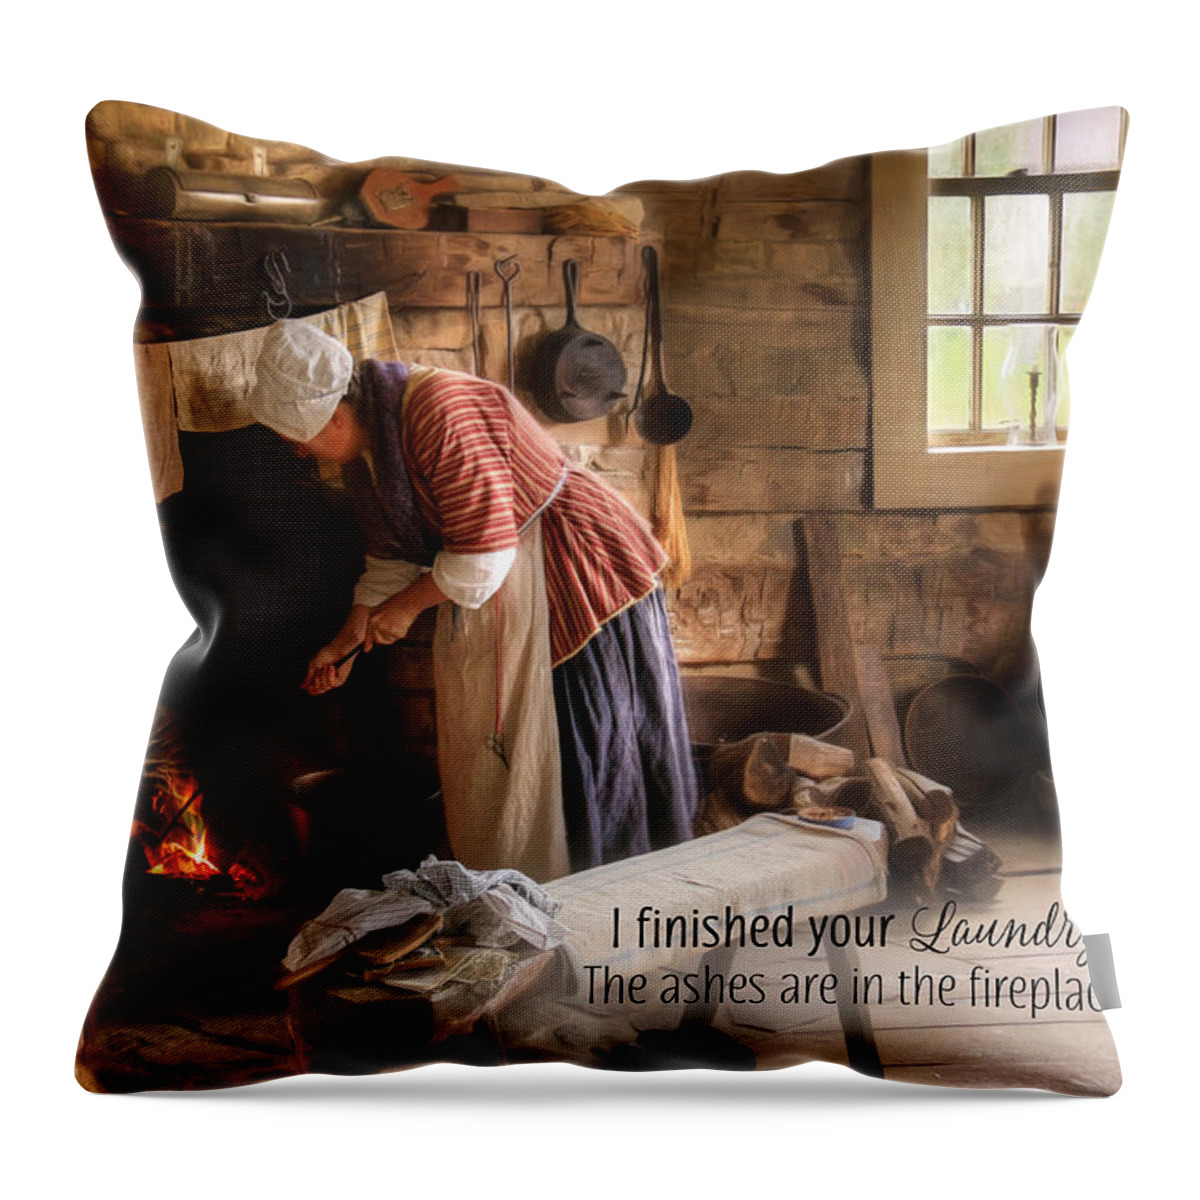 Laundry Throw Pillow featuring the photograph I Finished Your Laundry by Lori Deiter